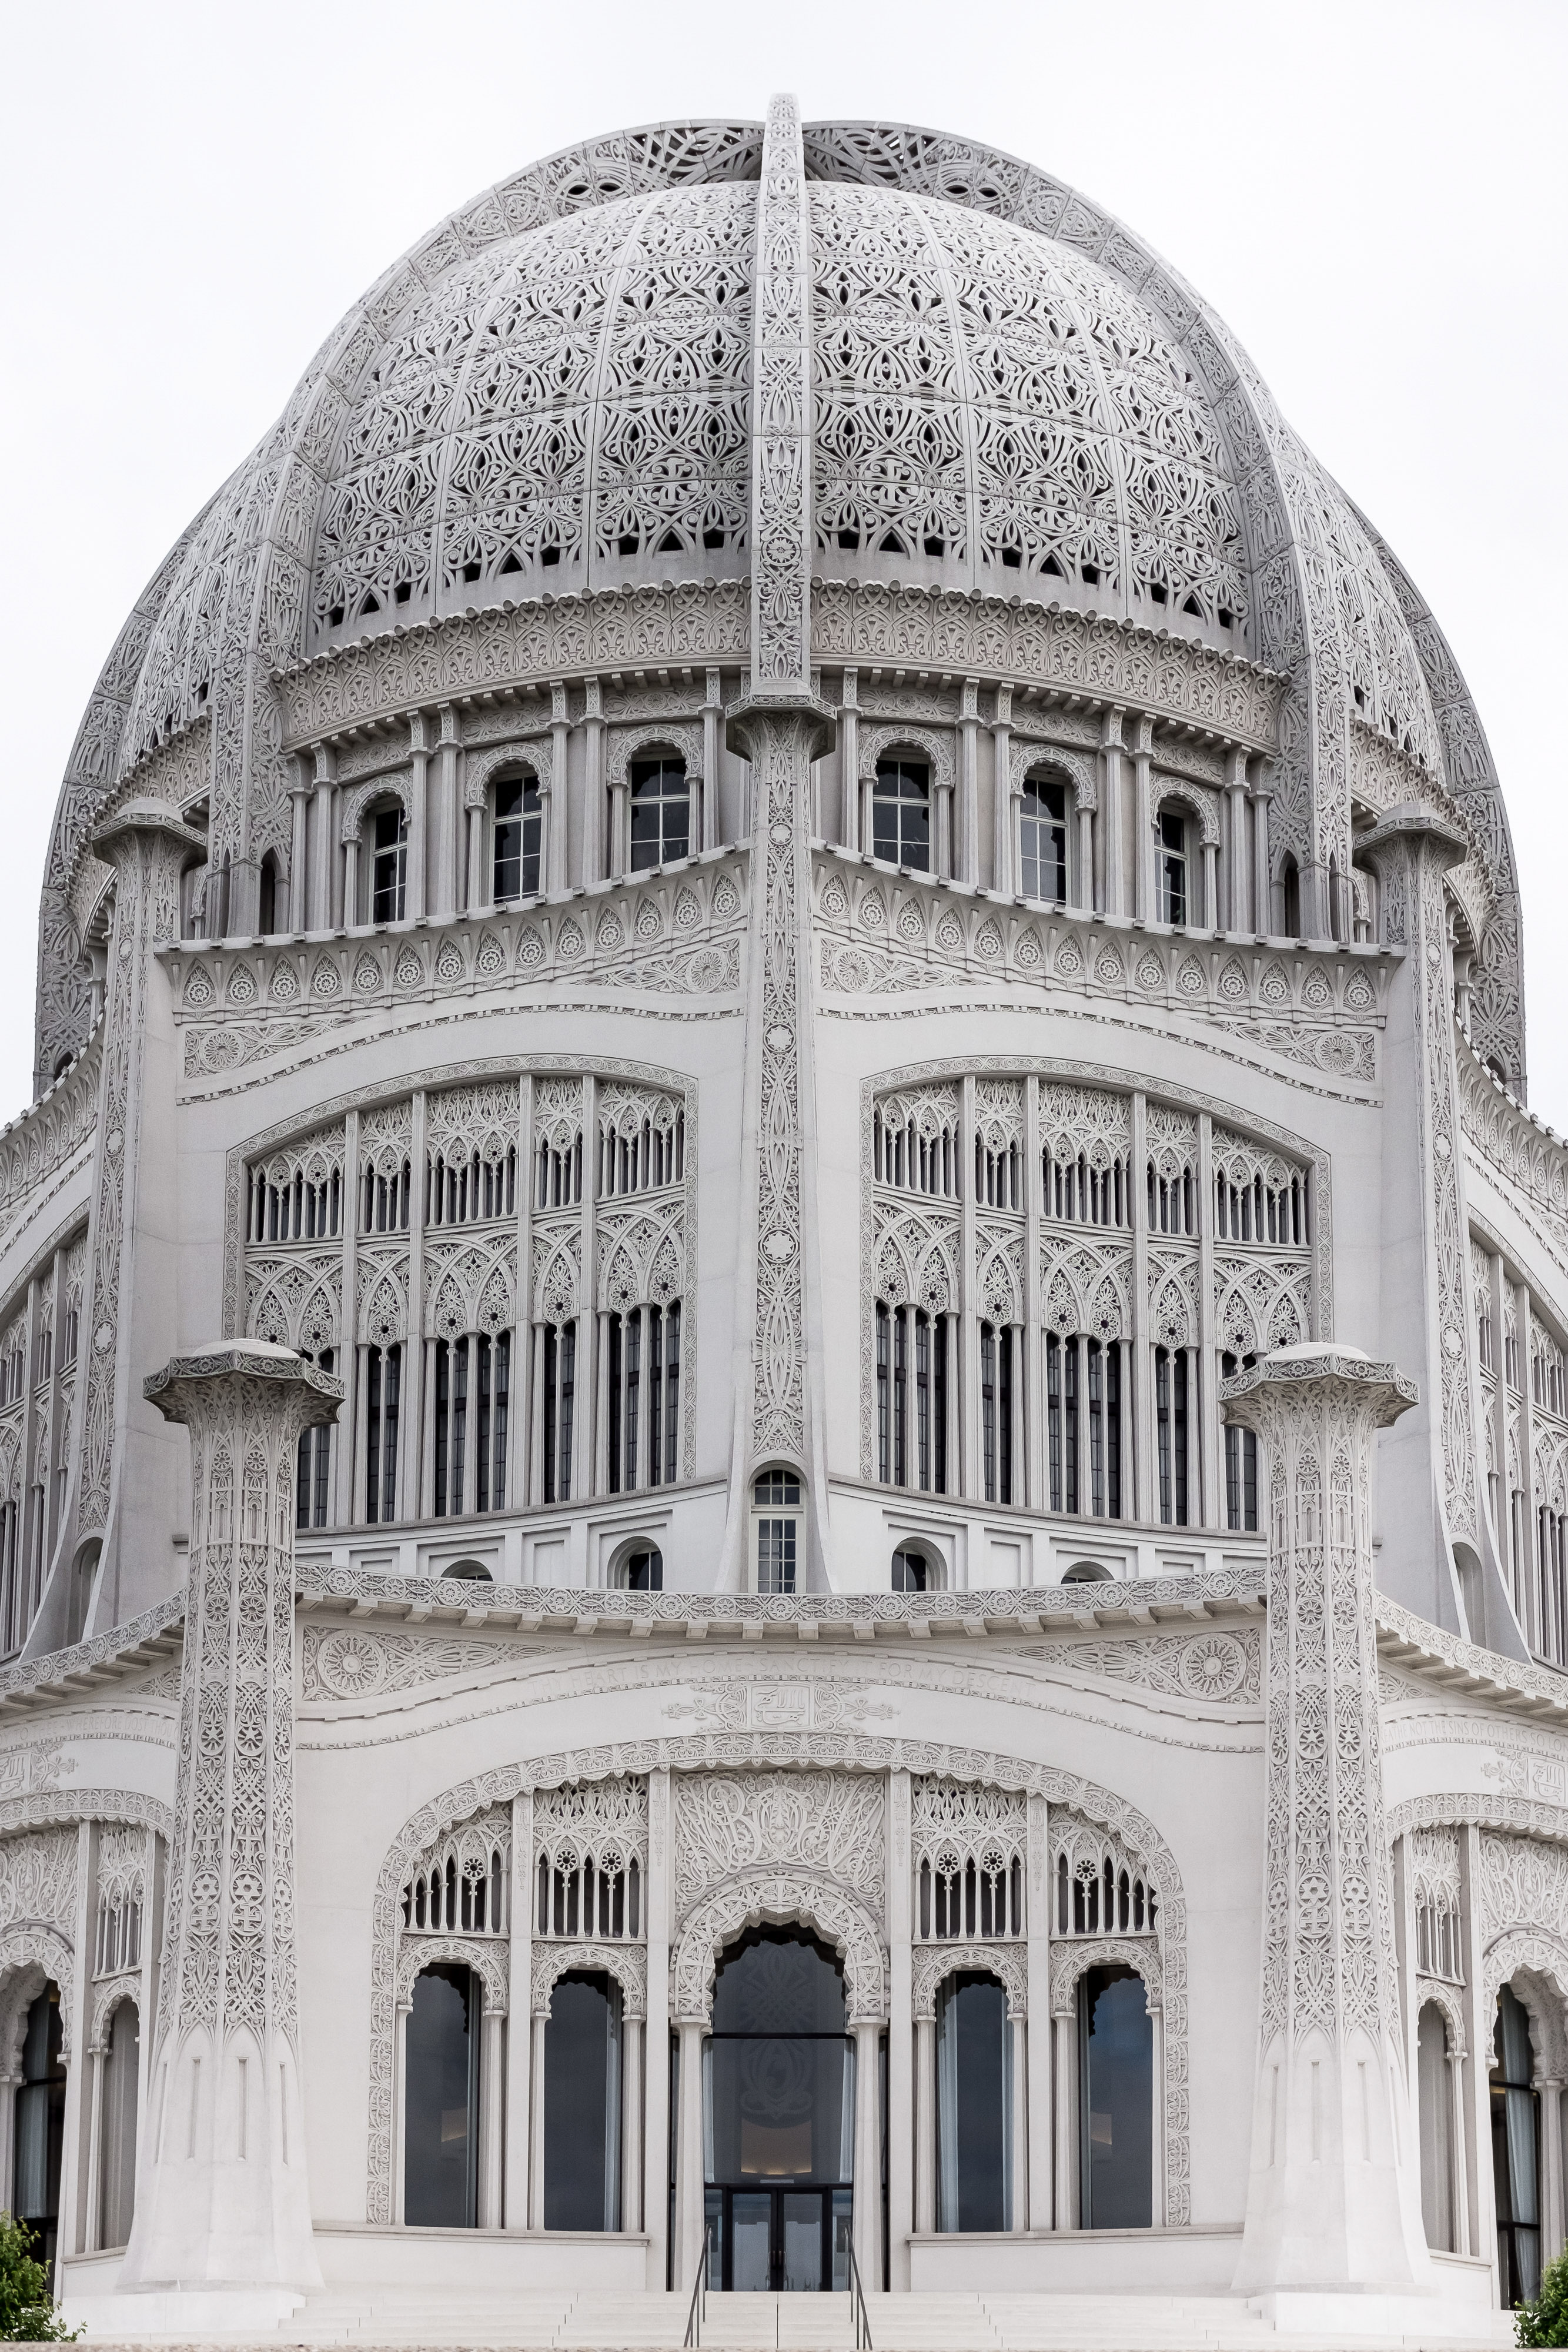 The Bah House Of Worship In Wilmette Illinois Photo On